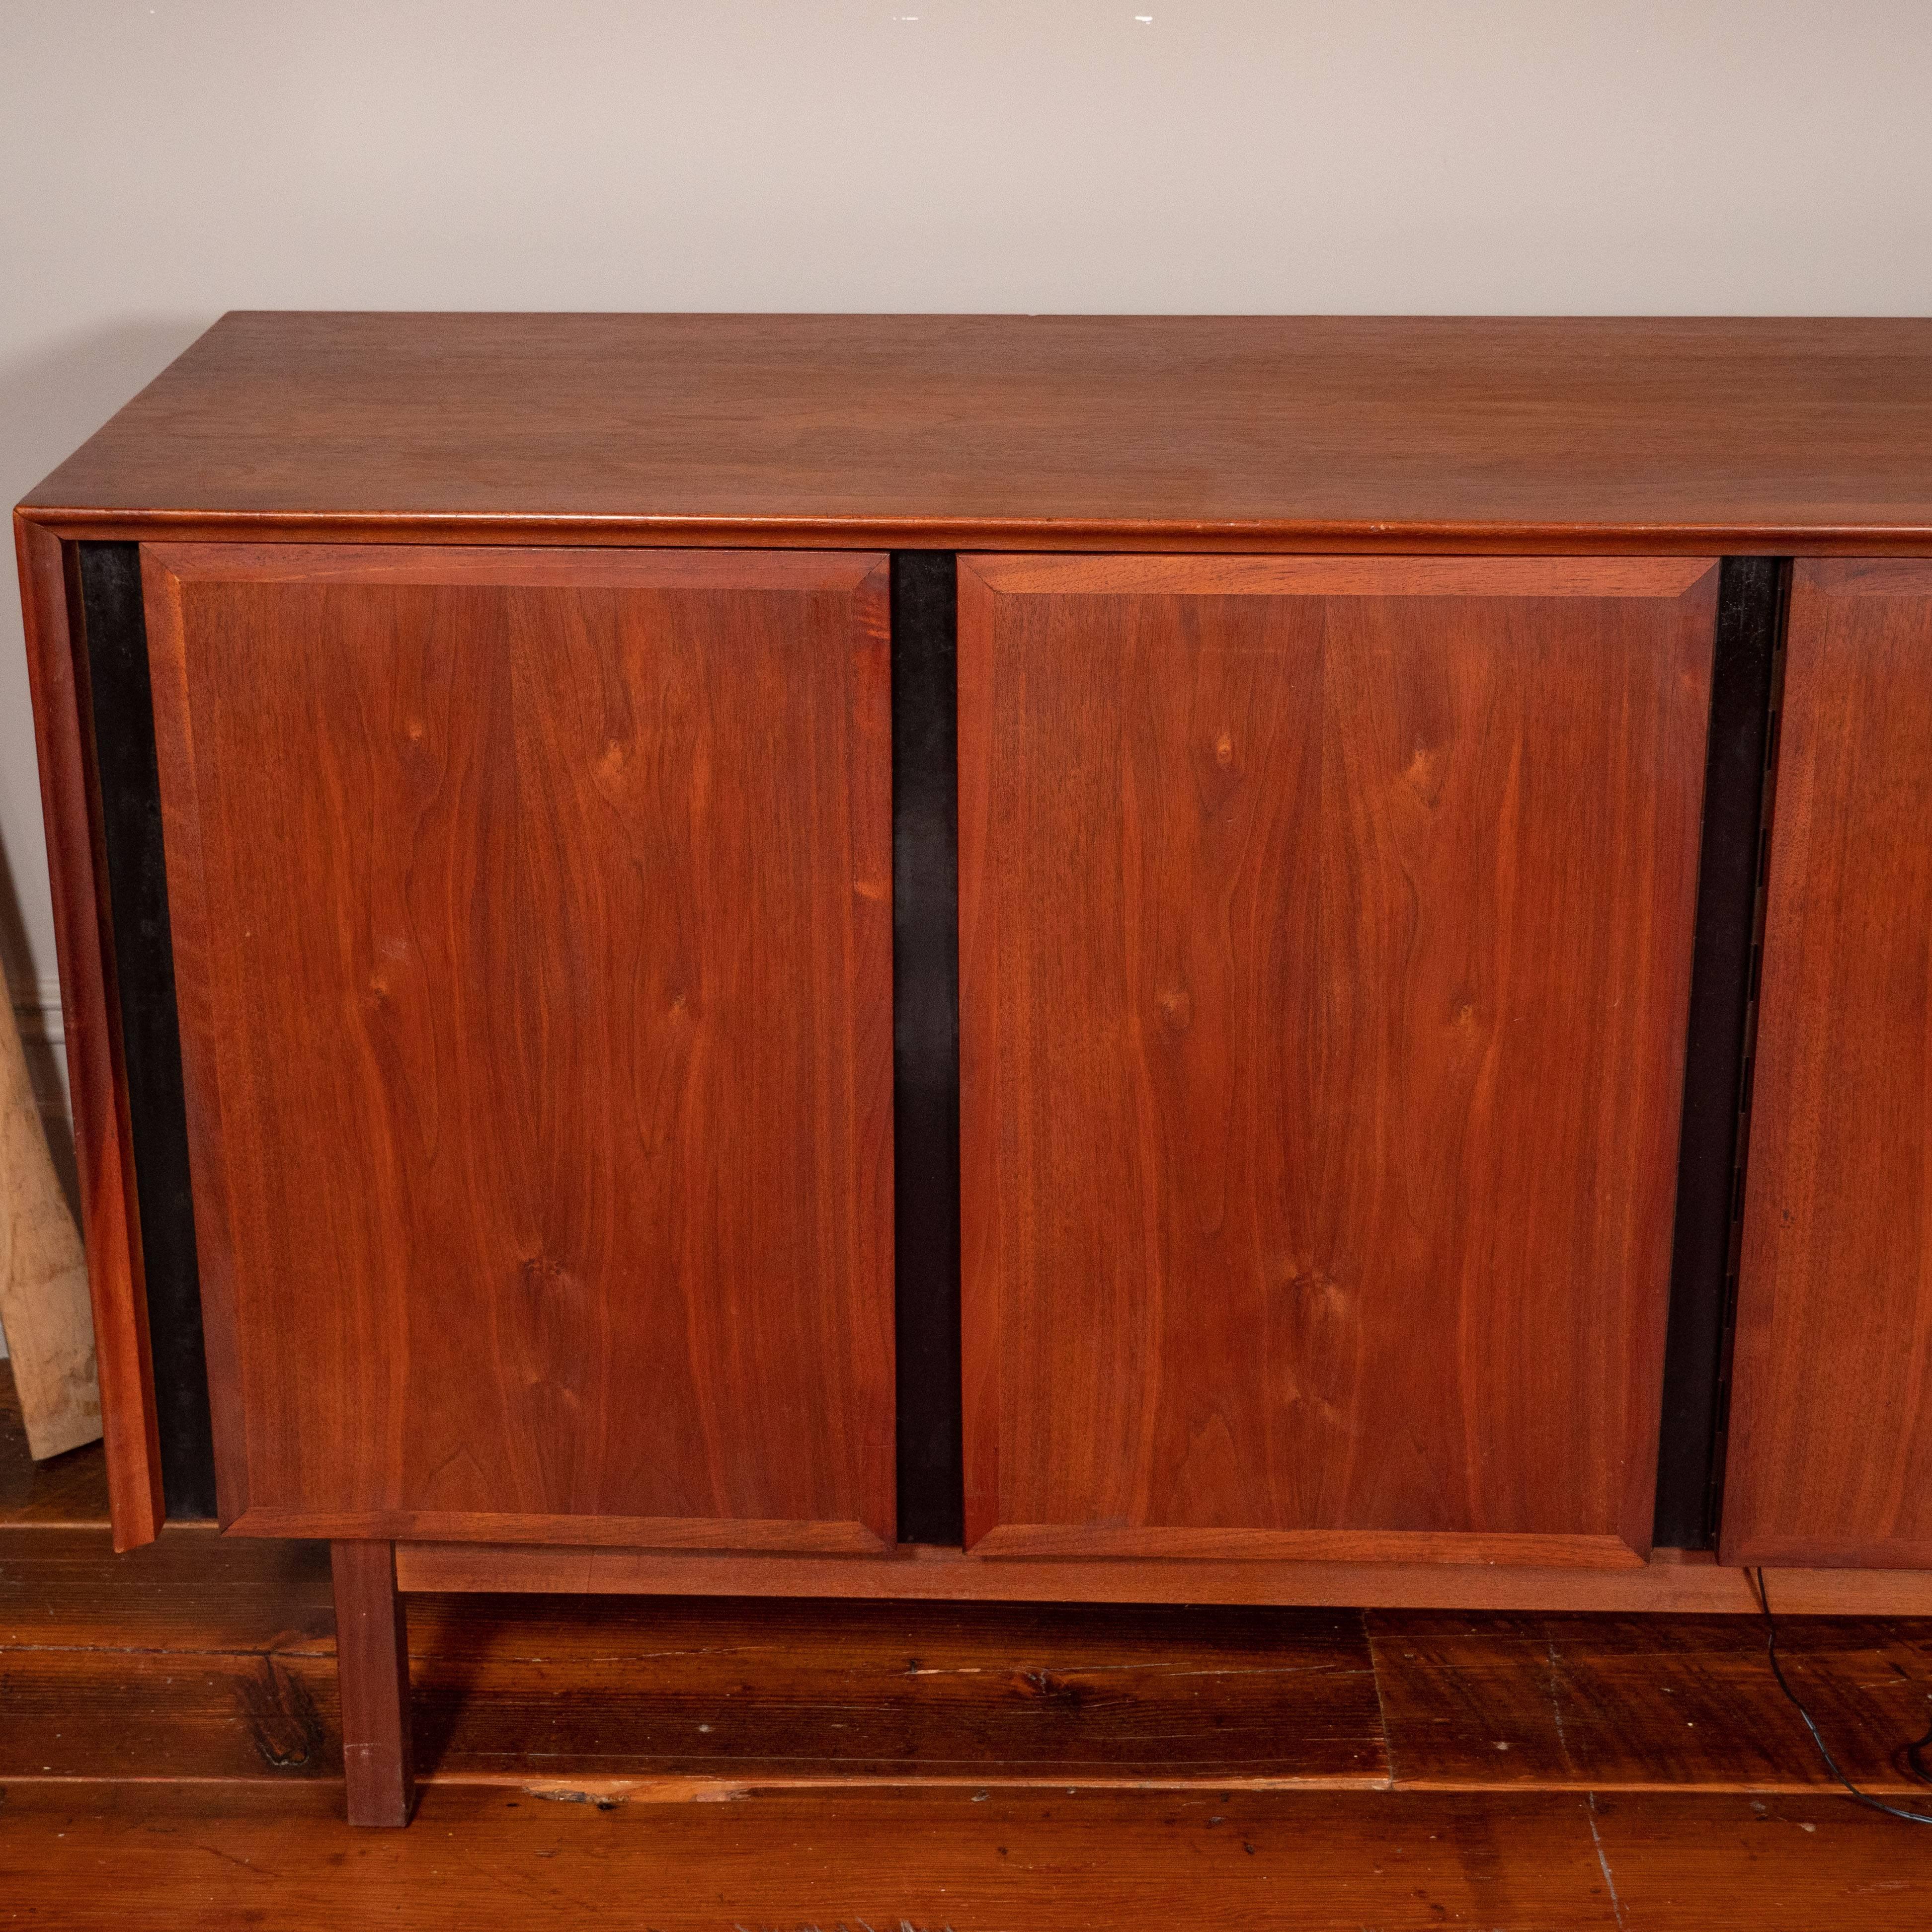 Midcentury walnut credenza sideboard by Merton Gershun for Gillingham, circa 1970s.
Left doors open to three enclosed drawers. Right side doors reveal open shelves. Dillingham sticker present.
Some fading/wear to finish on top. Scuffs on legs.
 